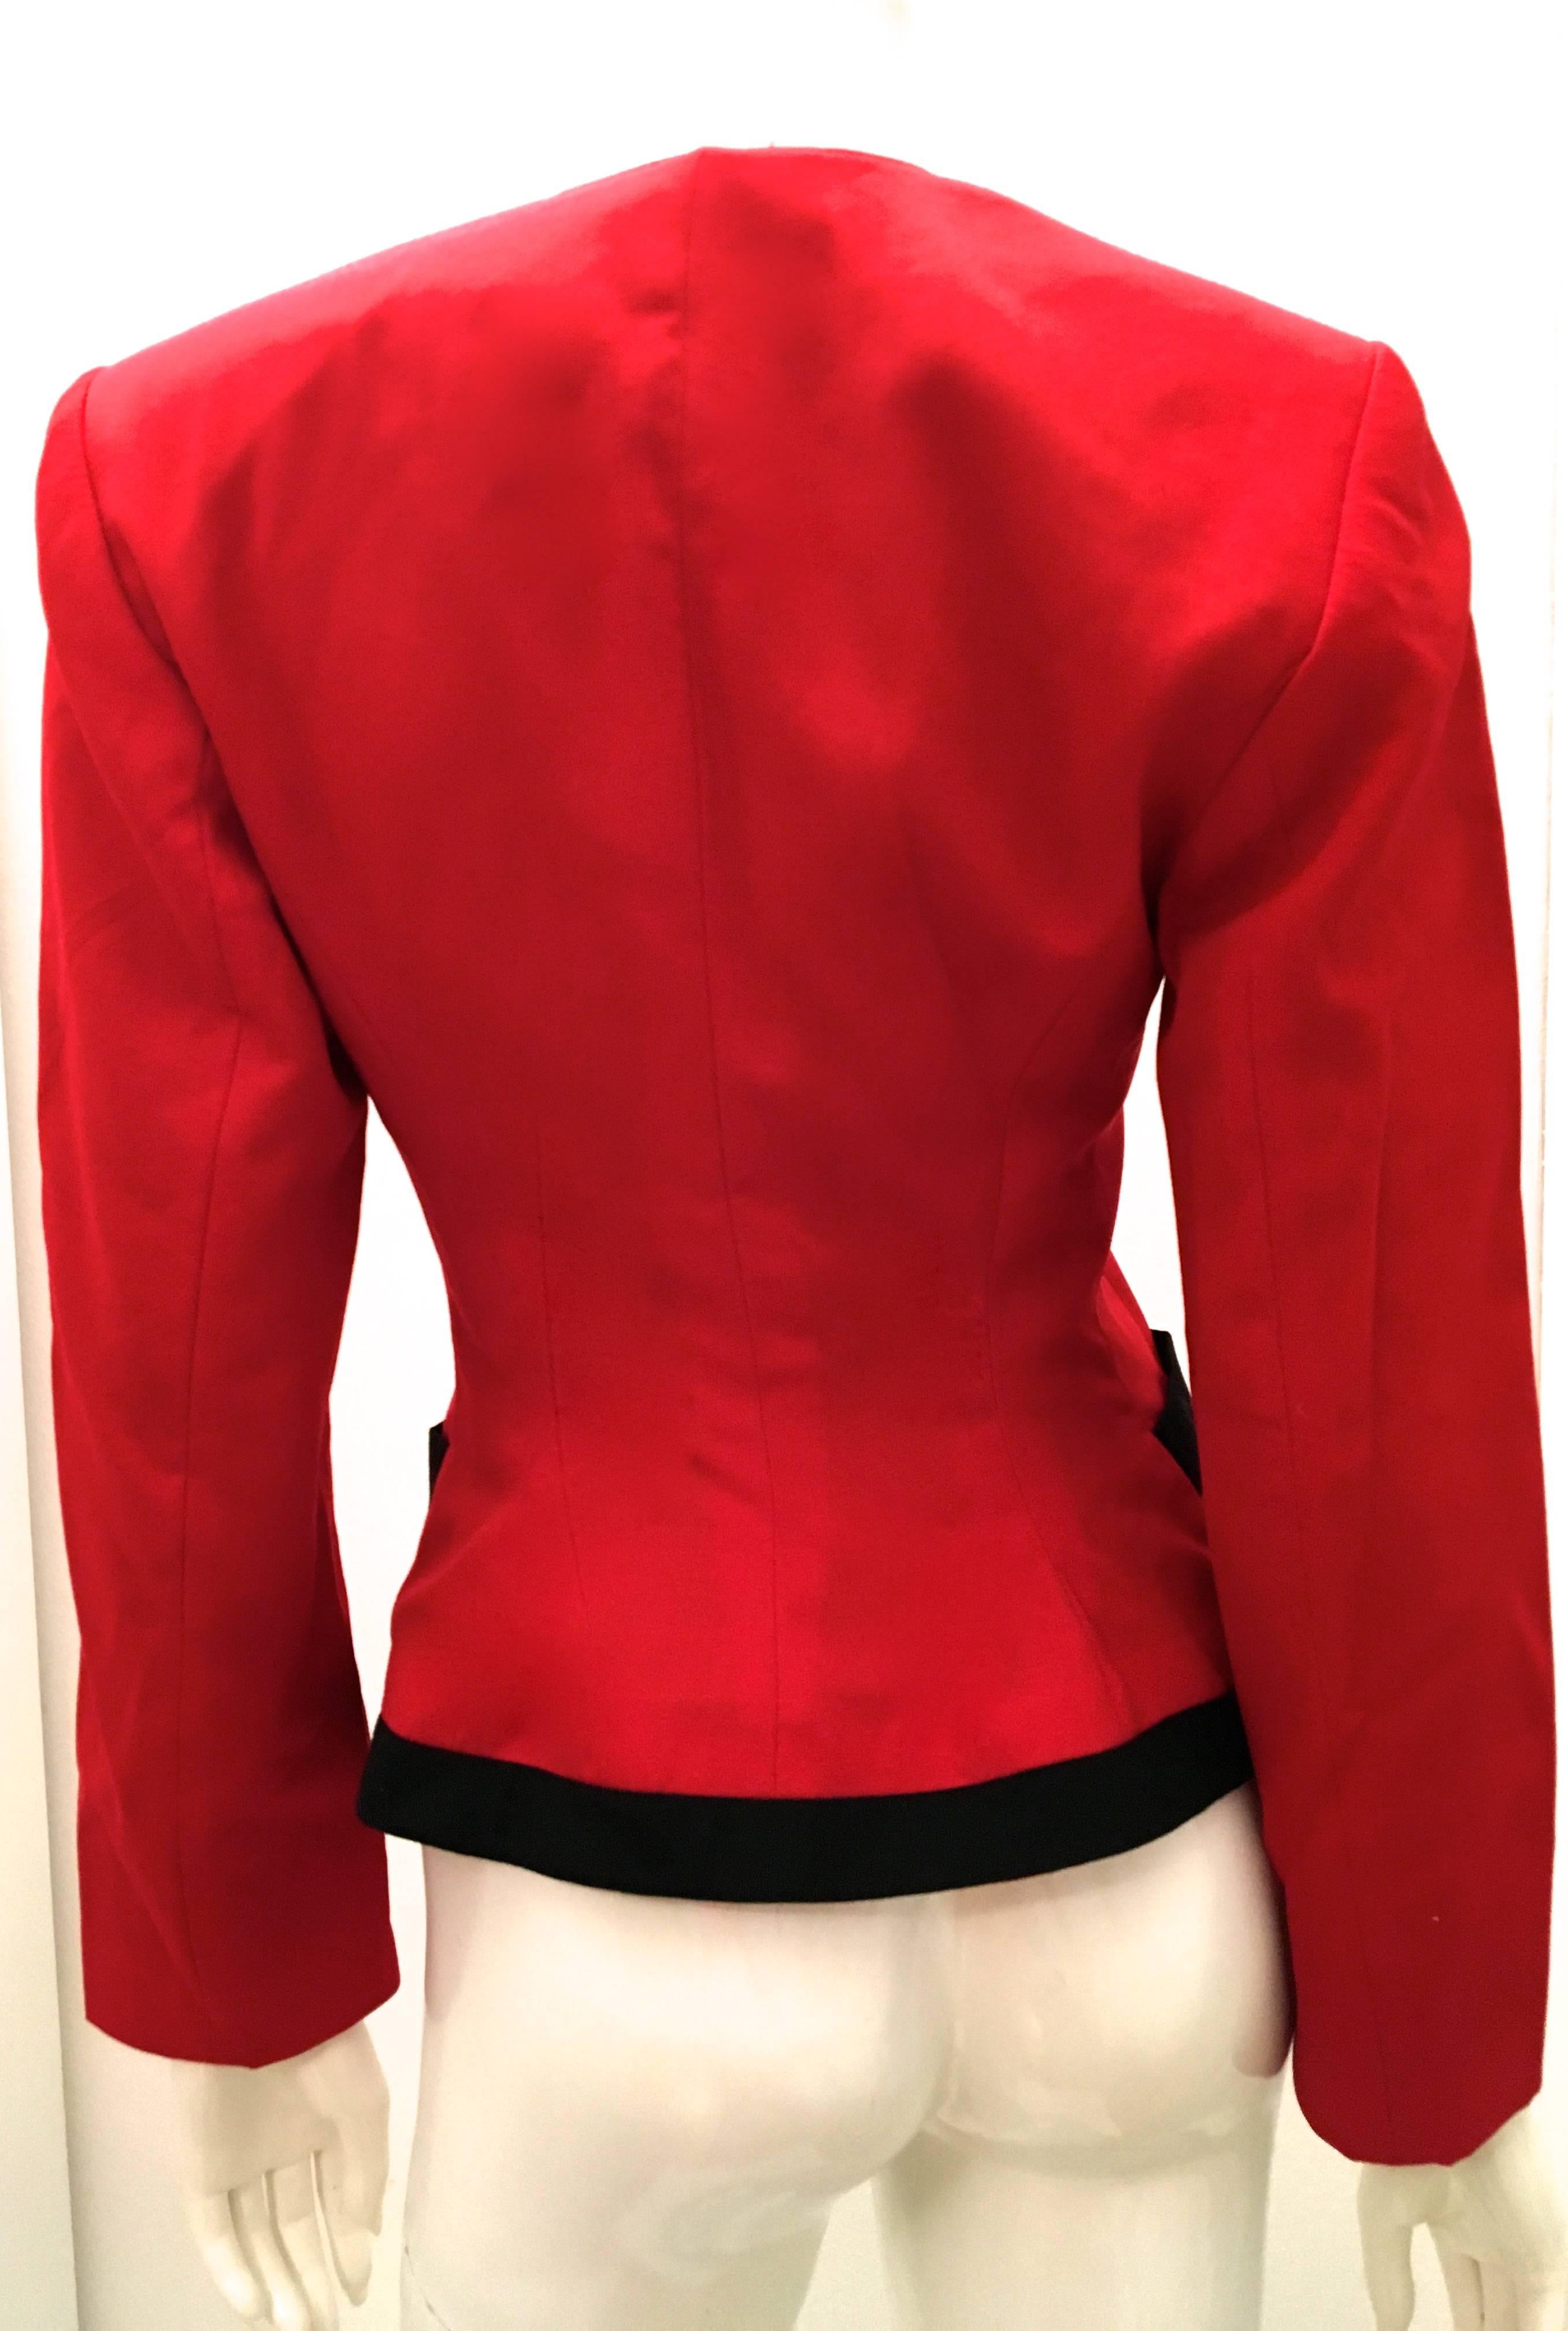 Women's Lolita Lempicka Red Zip-Up Jacket with Black Trim For Sale